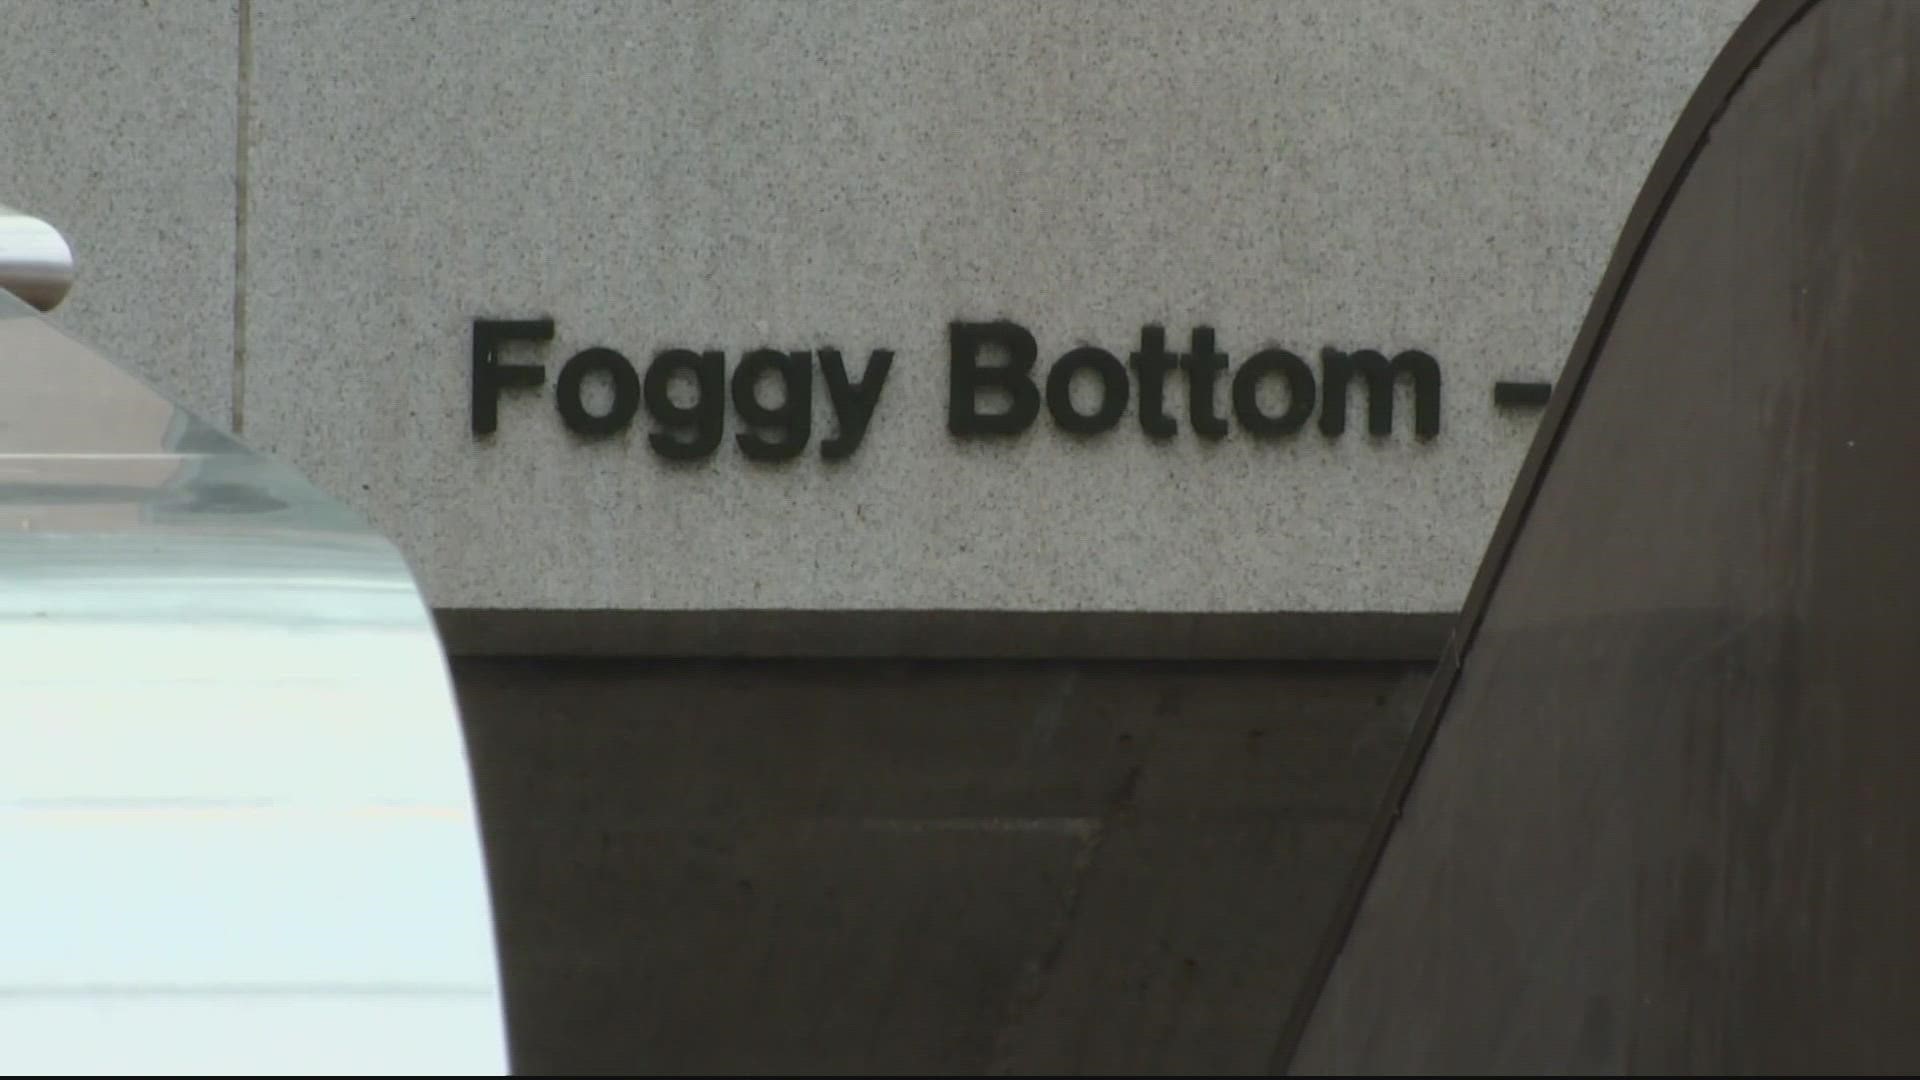 A woman claims she was sexually harassed at the Foggy Bottom metro station in D.C.